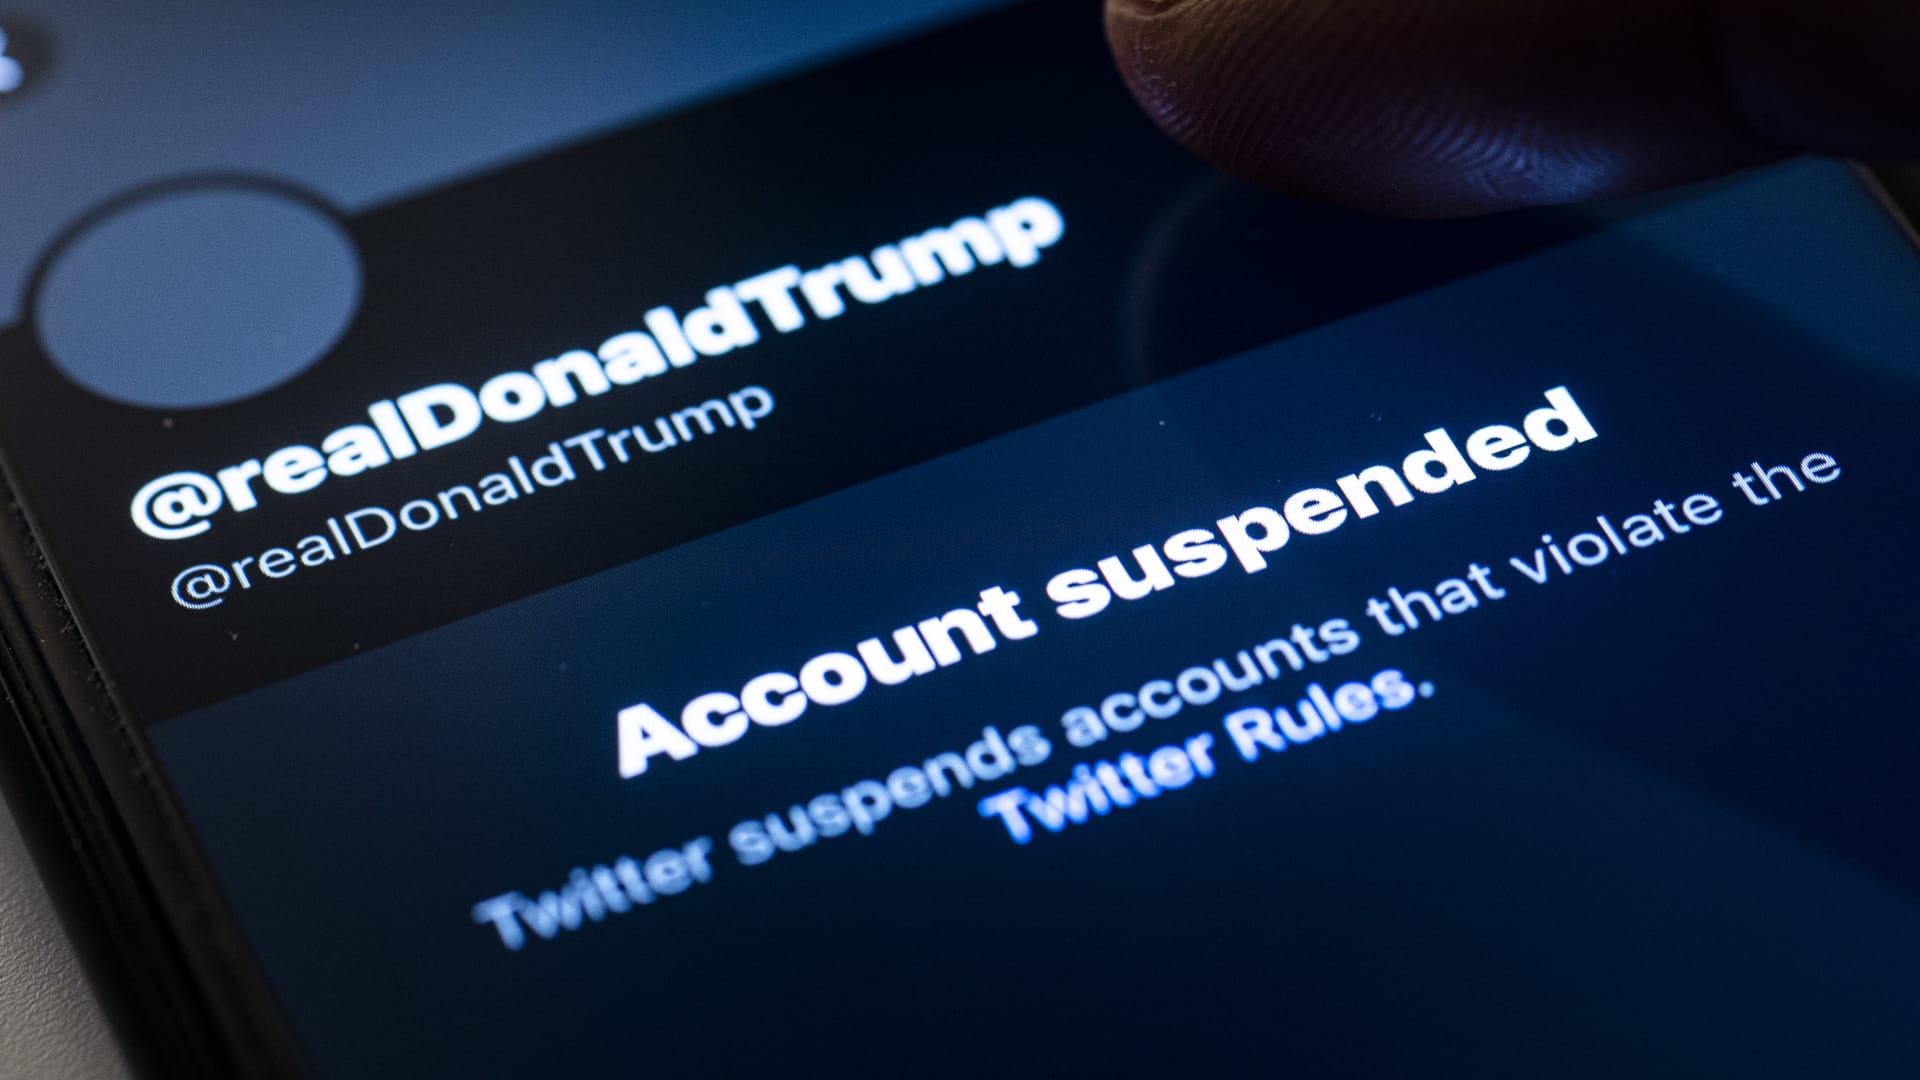 A person tabs on the suspended account of Donald Trump, President of the United States of America, on Twitter on January 09, 2021.